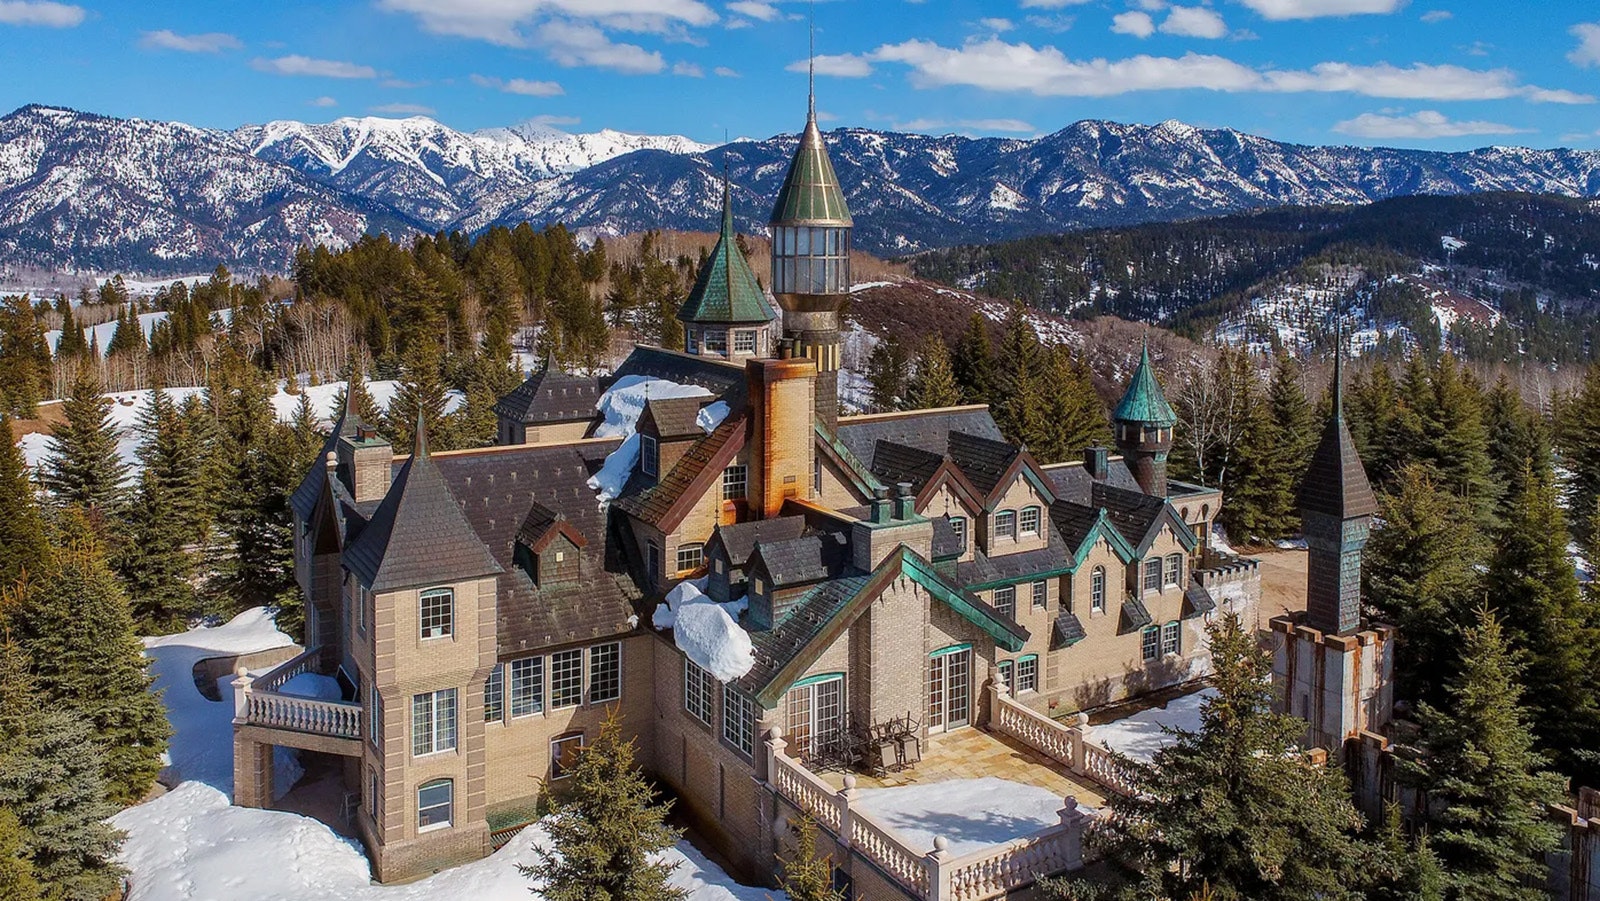 The exterior of the famous Bedford Castle in Wyoming is every bit a fairy tale, including appropriate architecture around the 40-acre grounds.